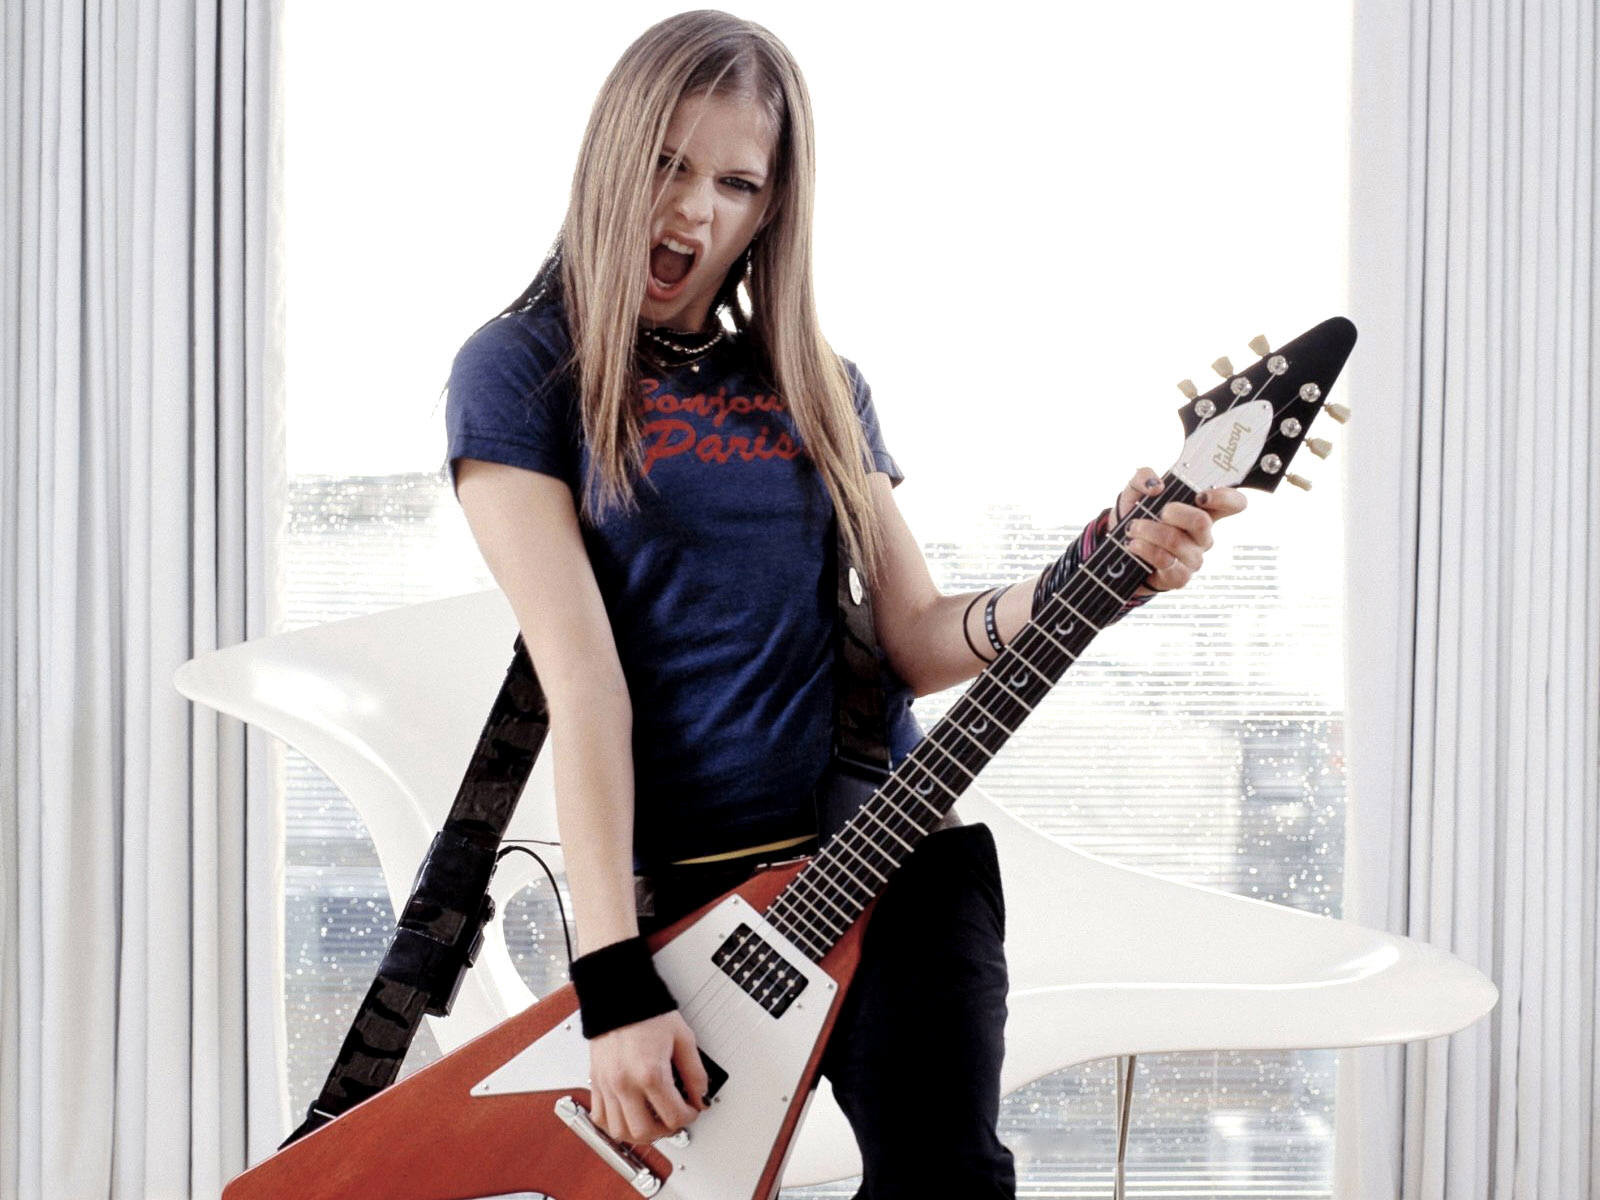 Free Avril Lavigne With Guitar, Computer Desktop Wallpapers, - Avril Lavigne With Guitar - HD Wallpaper 